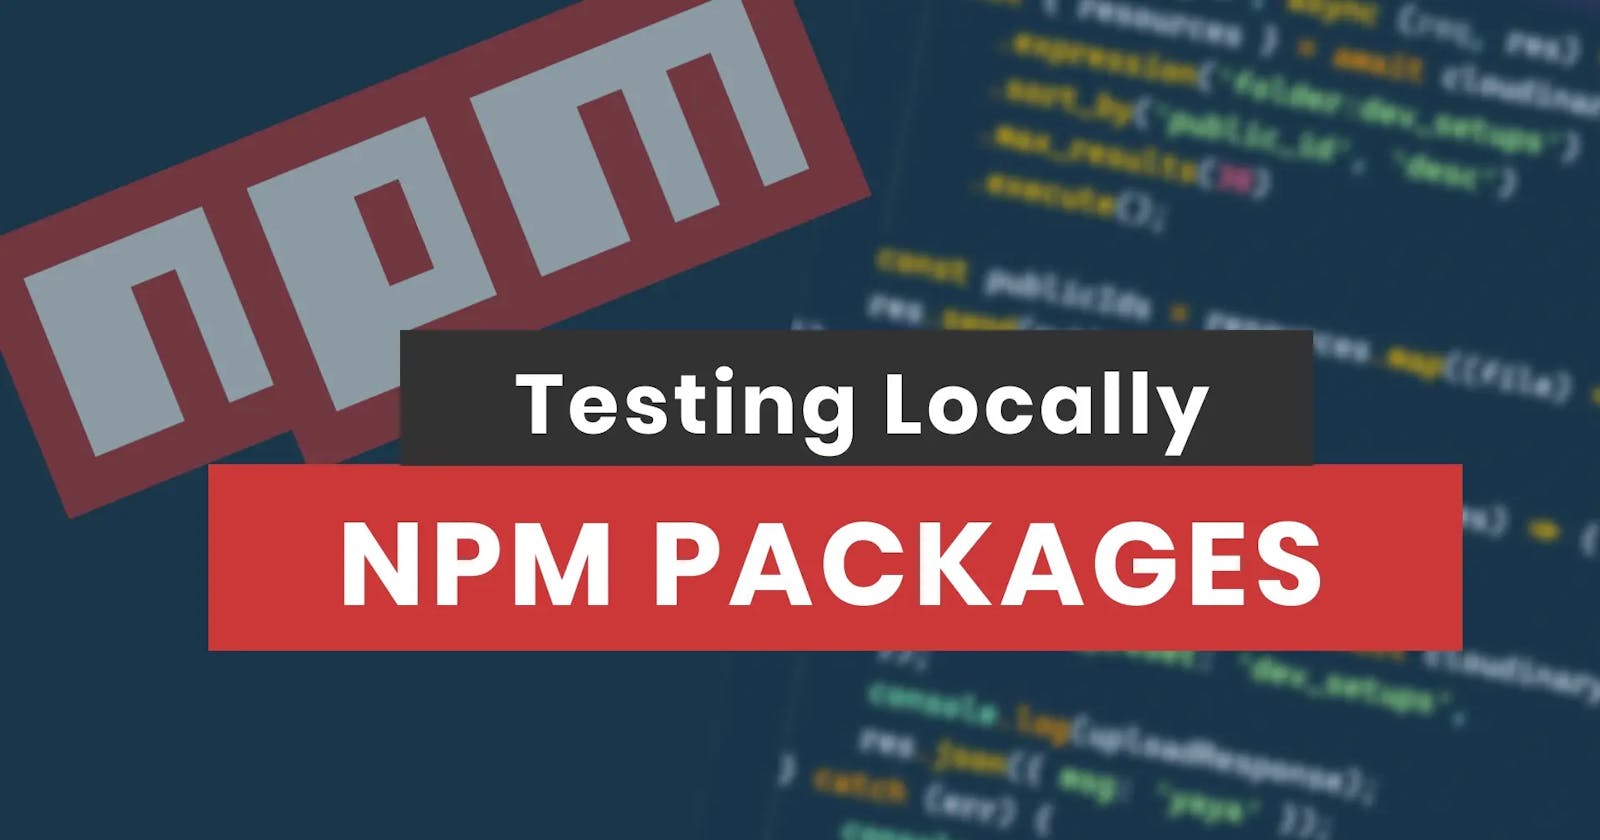 How To Test NPM Packages Locally